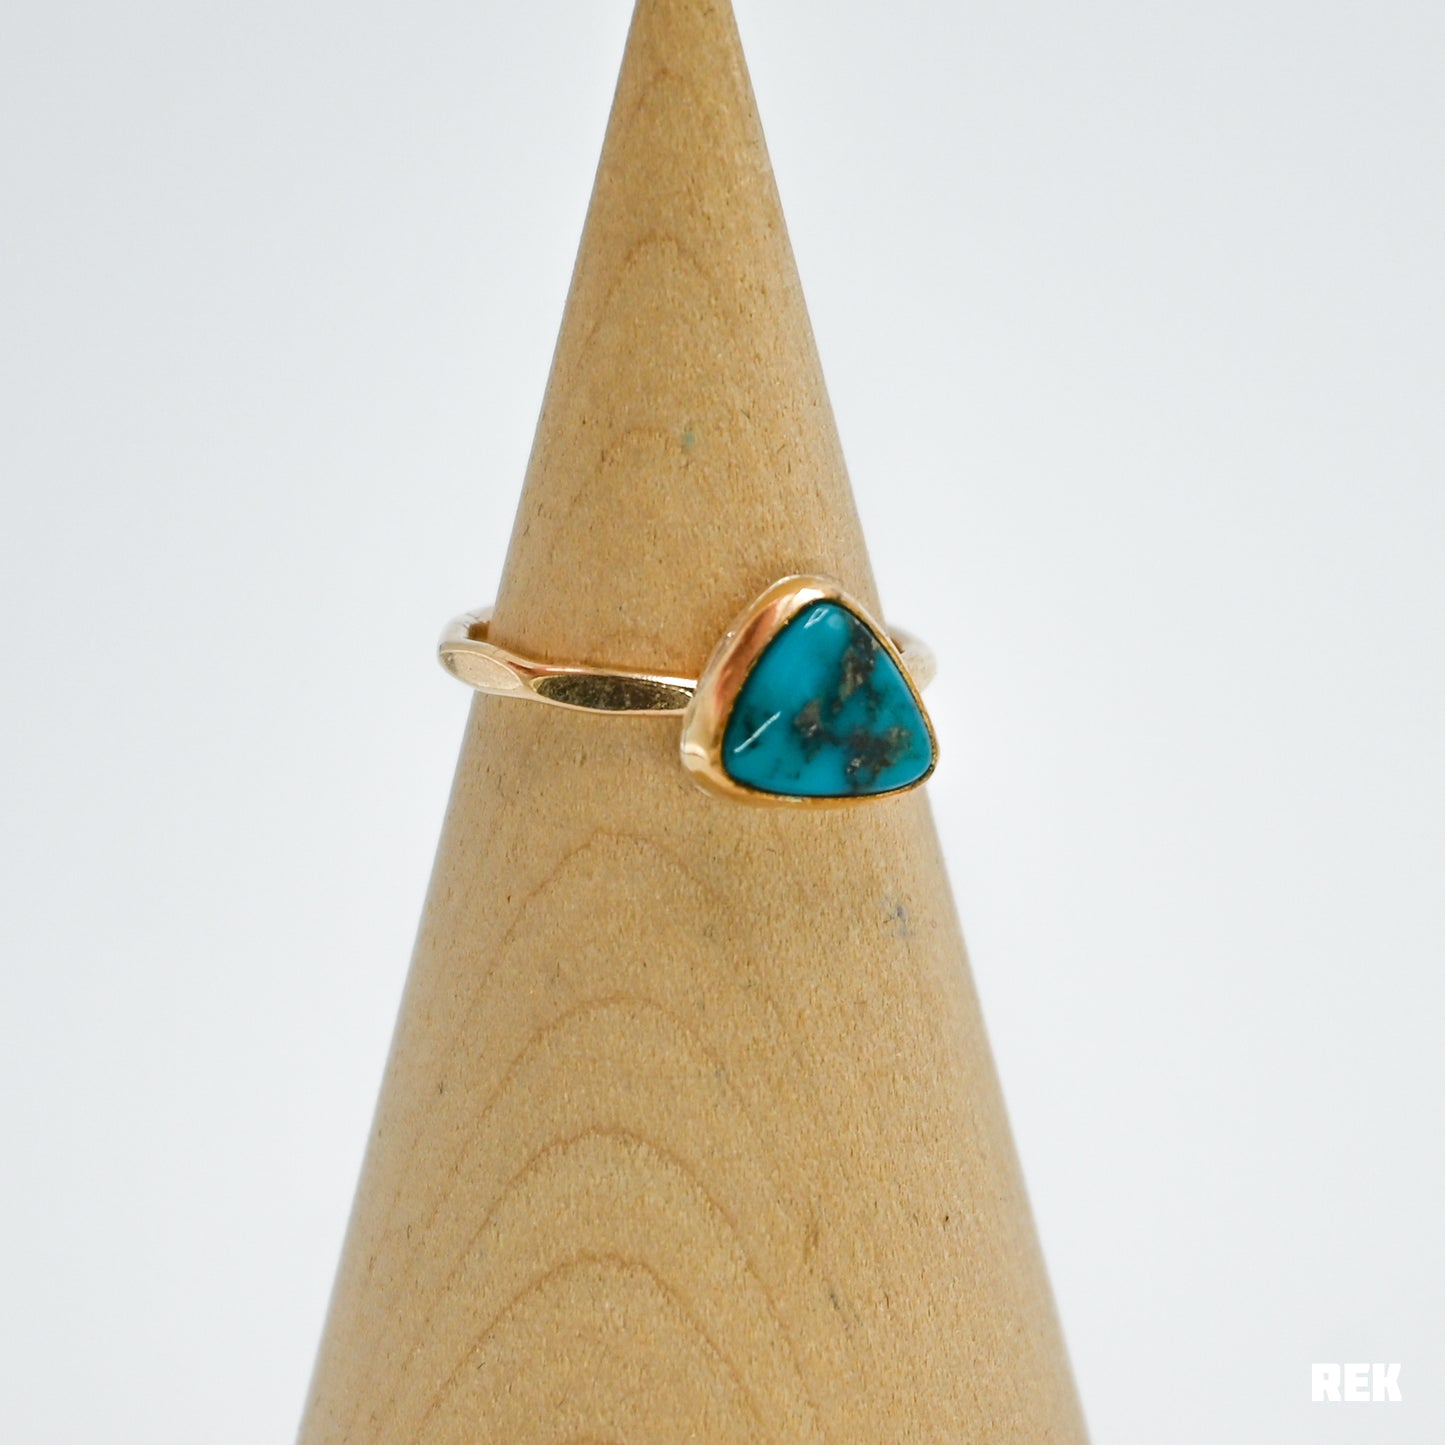 Gold fill Ma'anshan turquoise with pyrite size 7.25